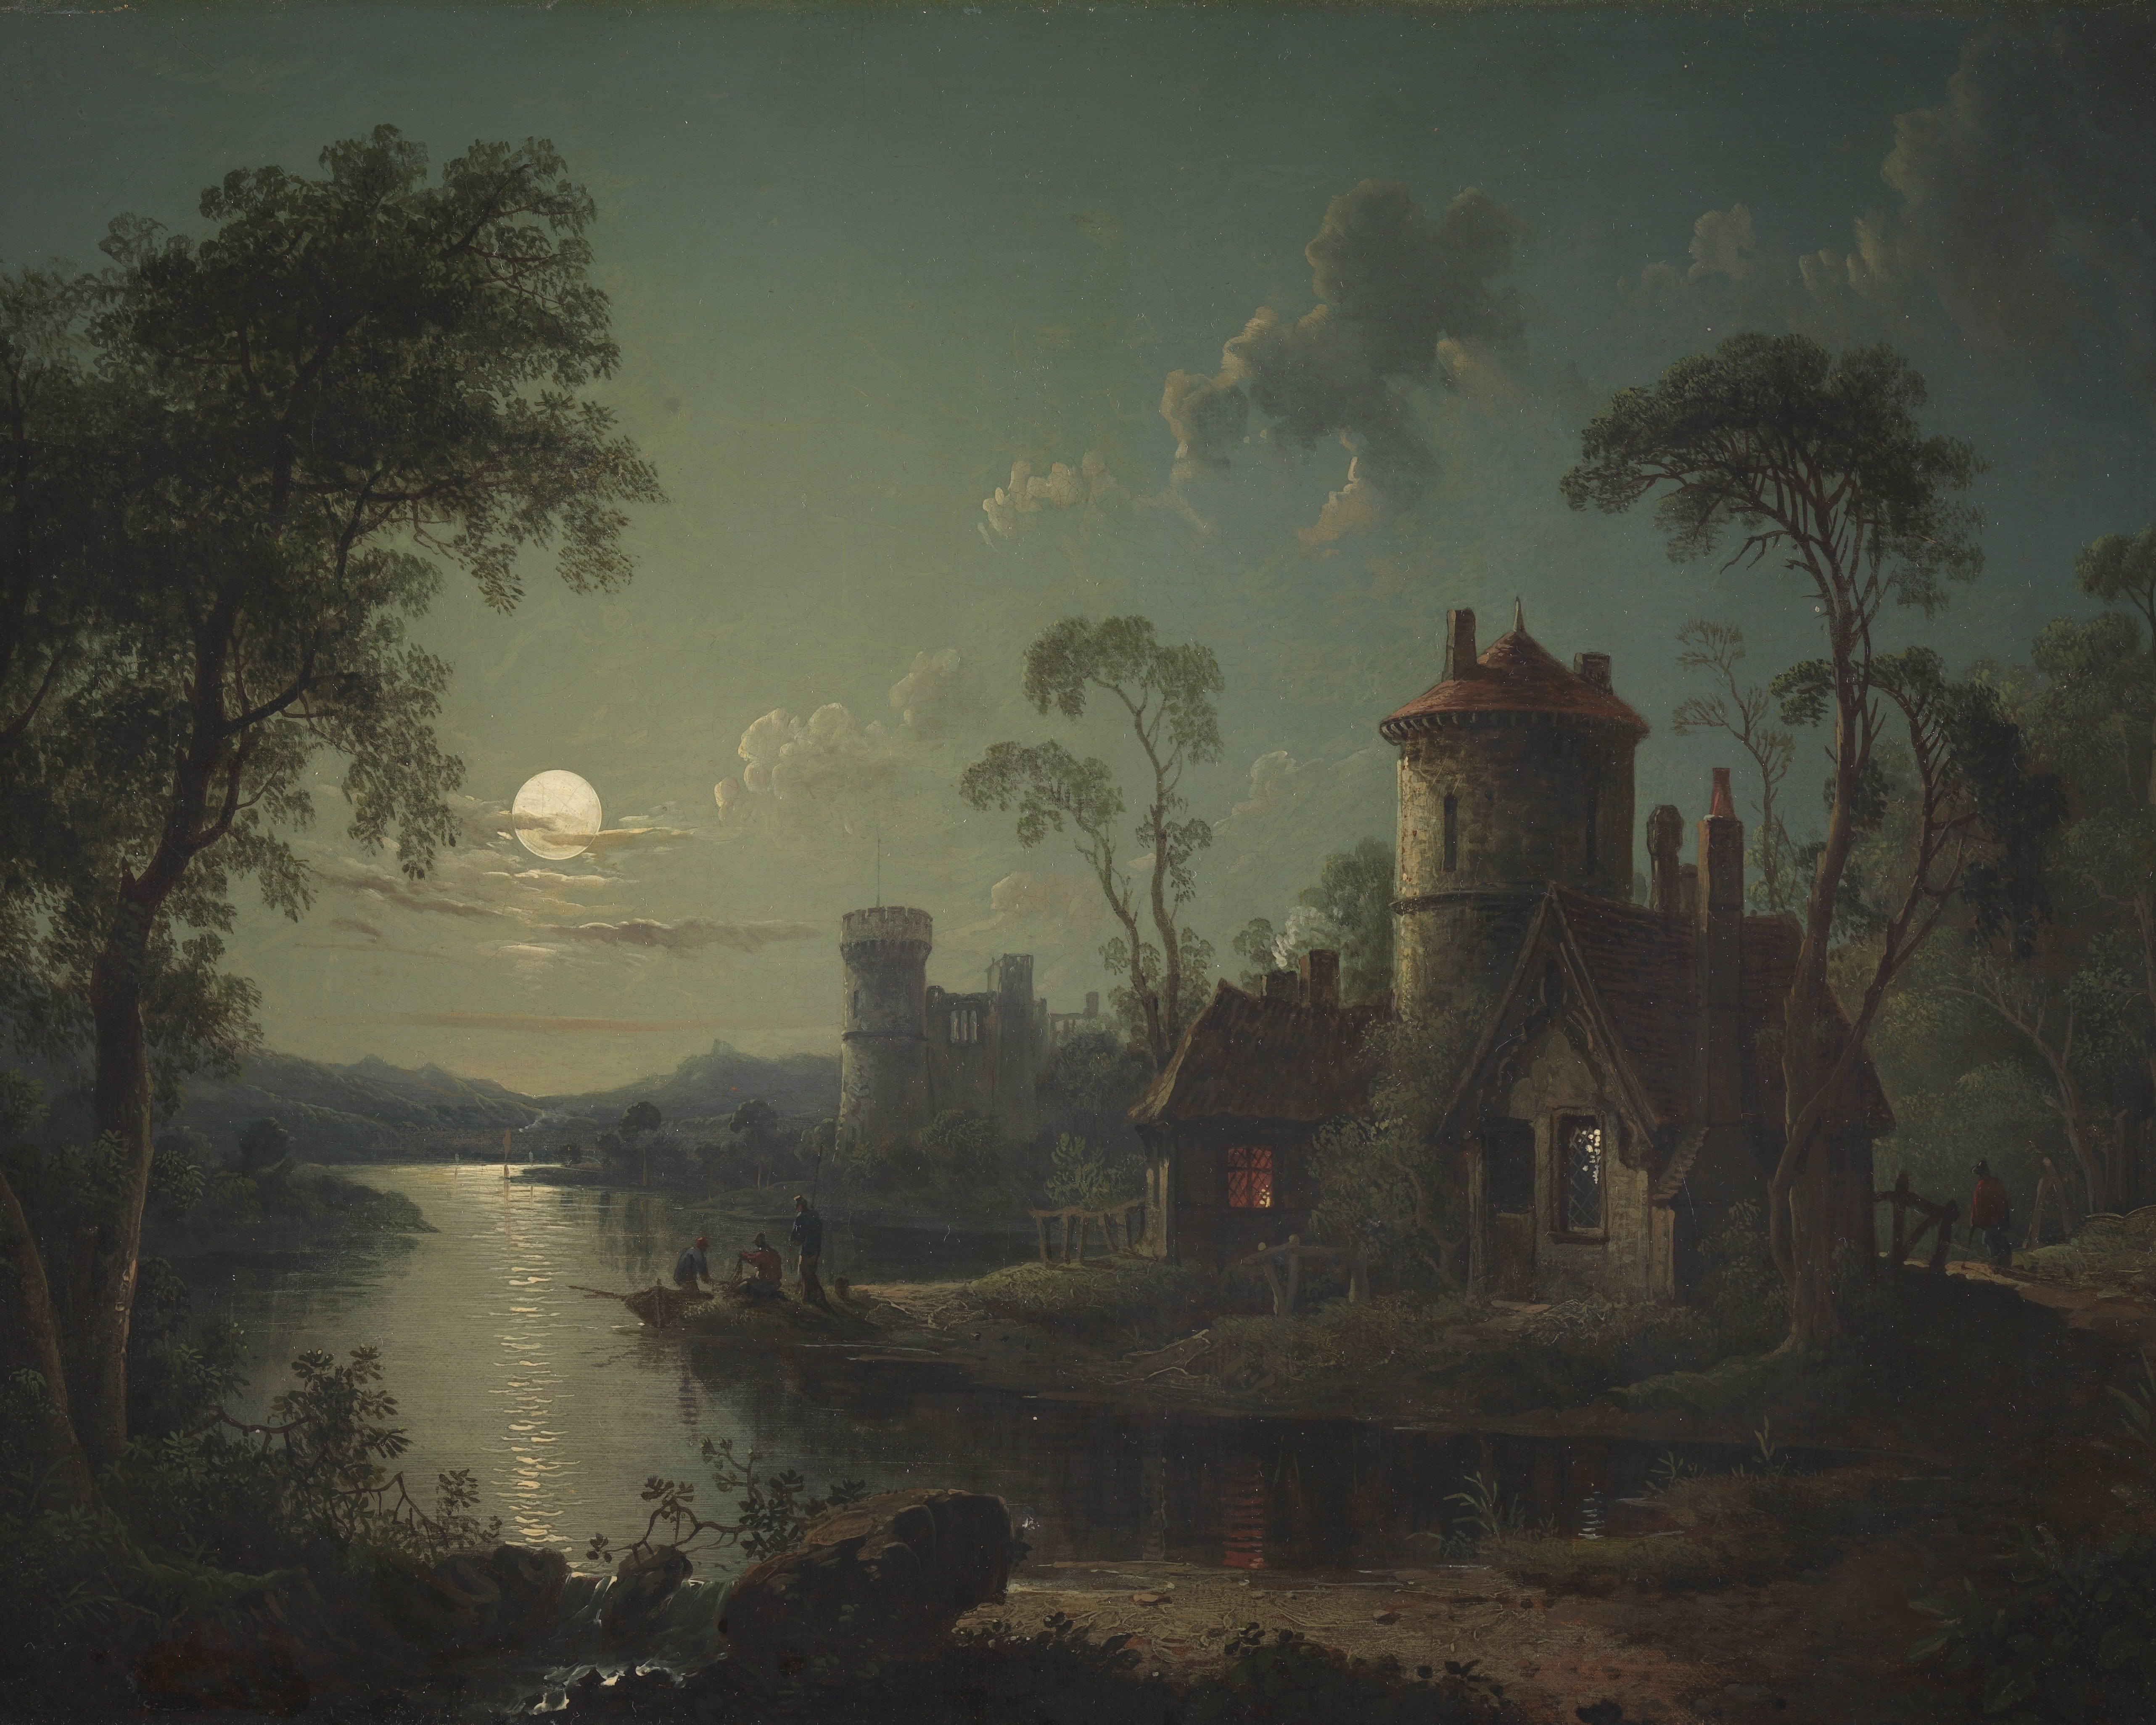 General 5128x4102 Sebastian Pether castle house moonlight Oil on canvas painting stream nature fishing landscape river evening glow chimneys cottage men water path clouds trees rocks rowboat digital art classic art